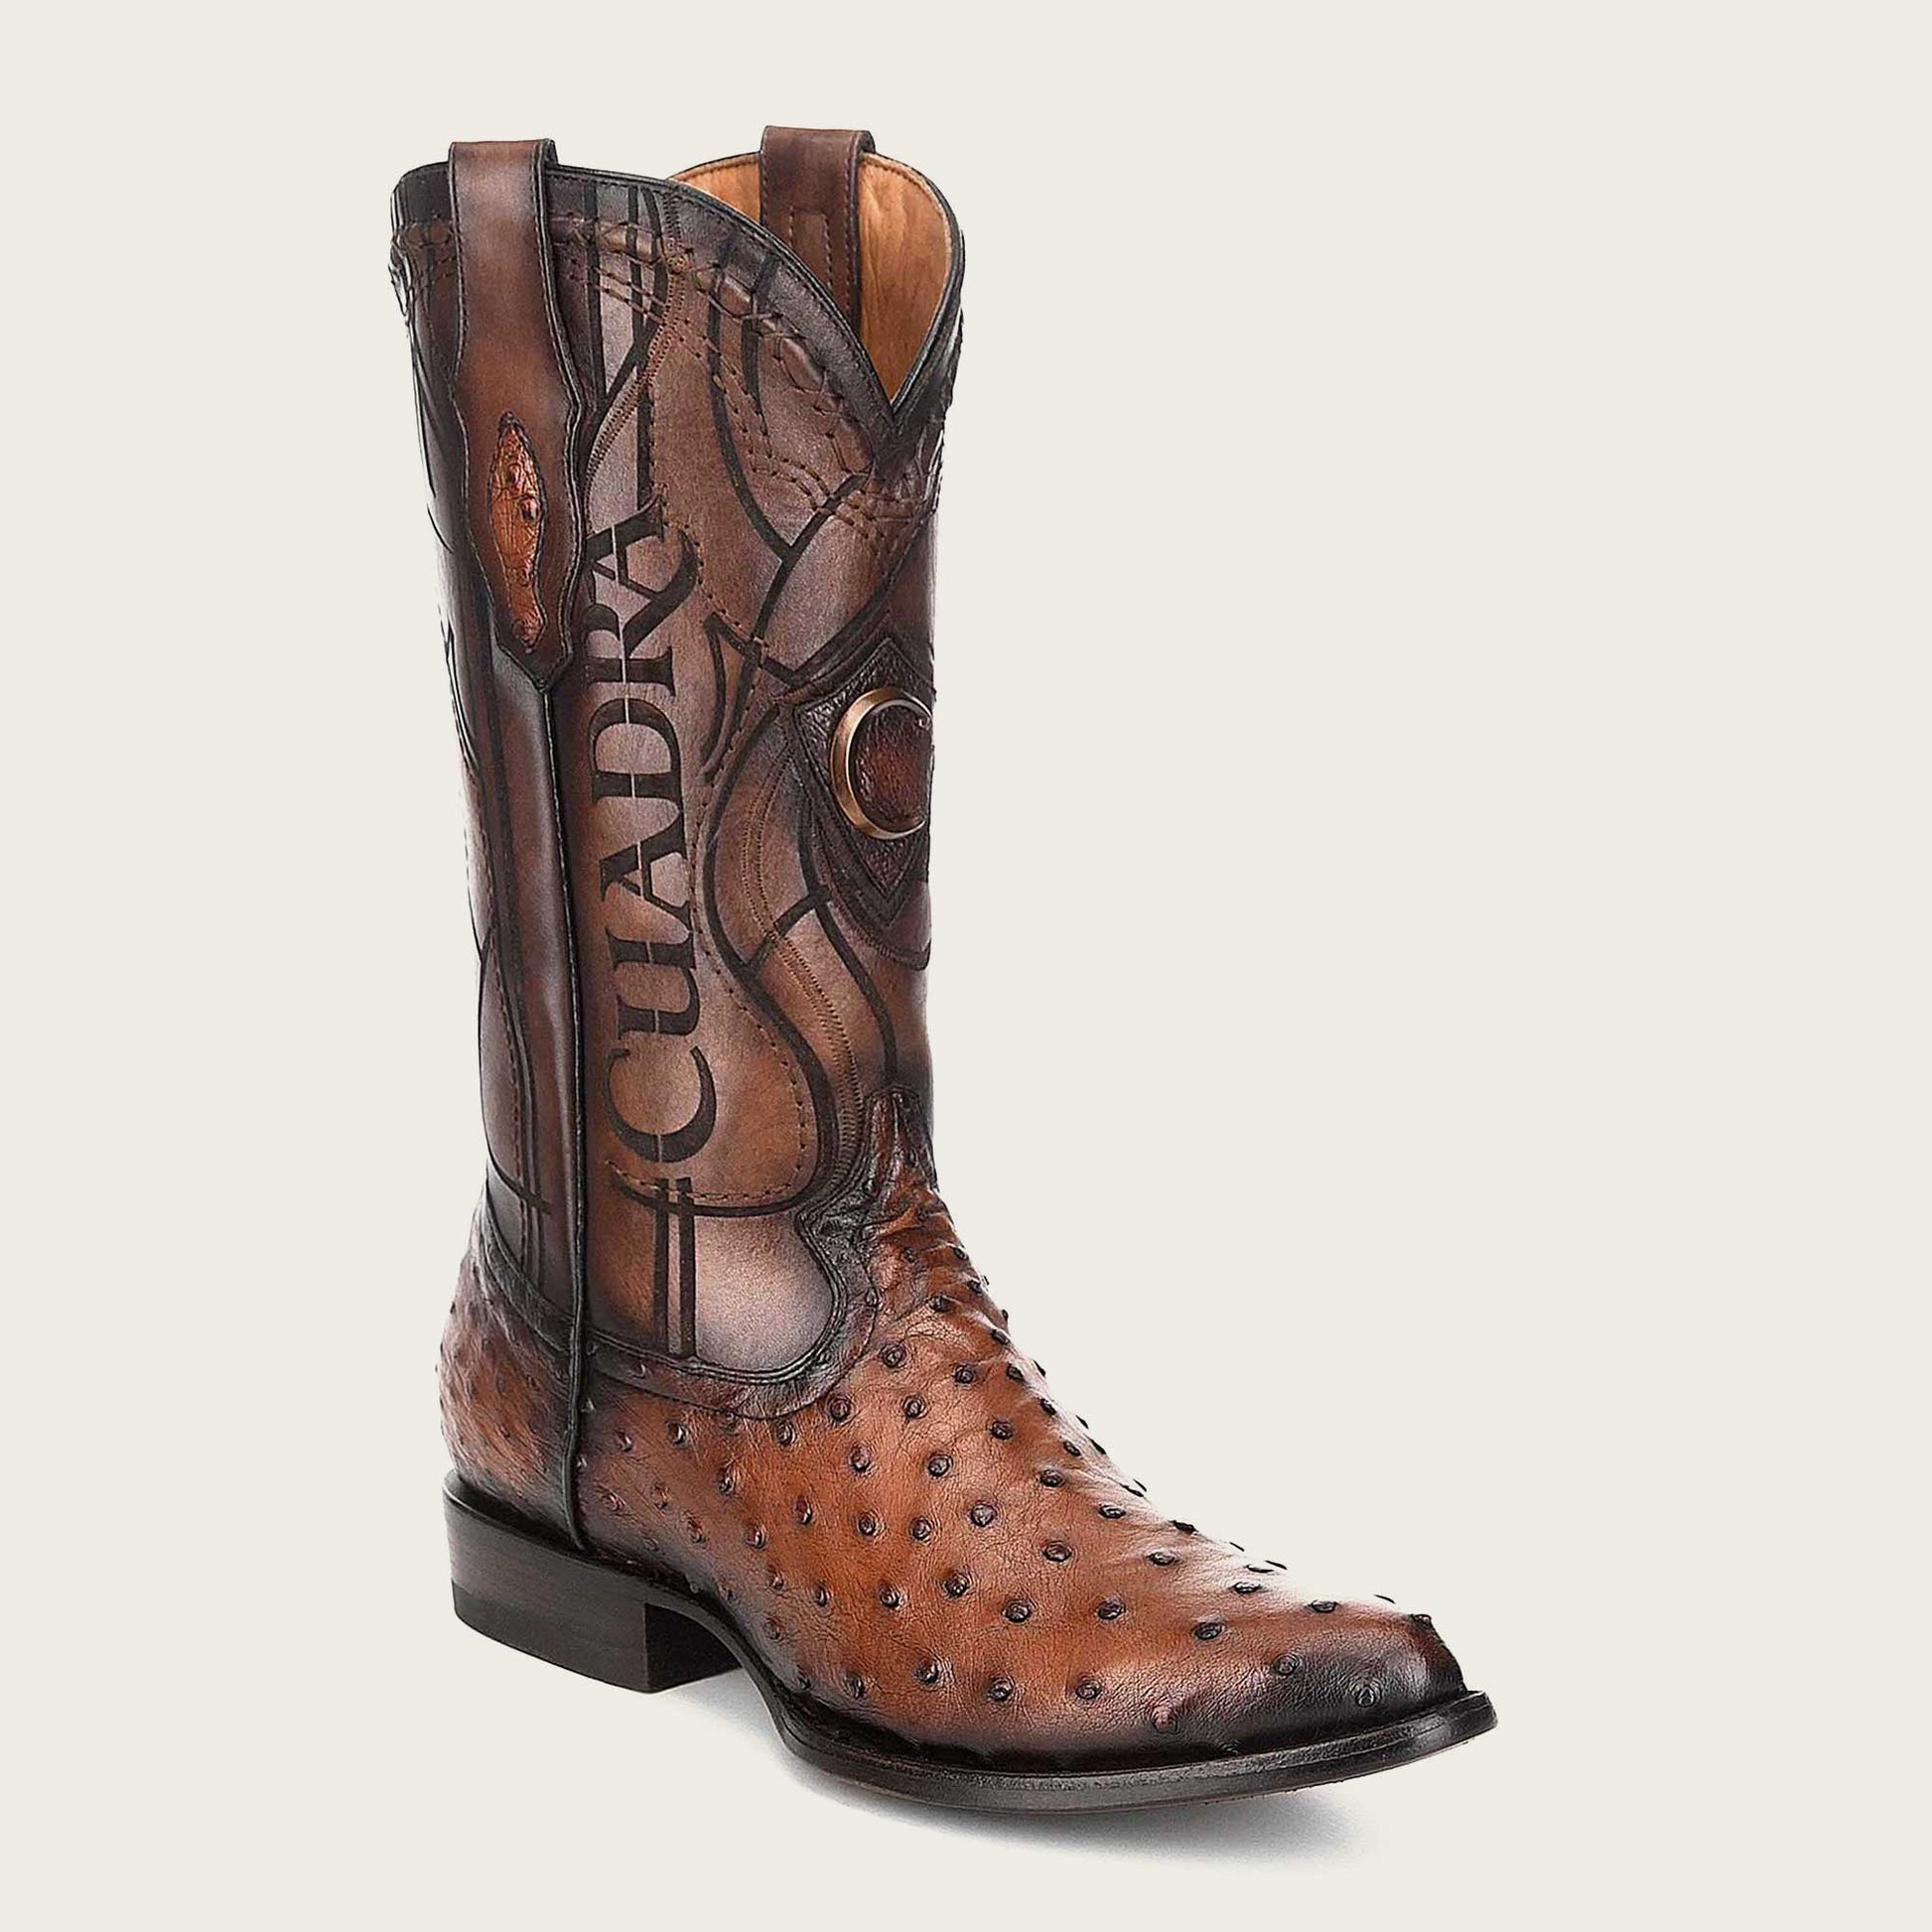 Elevate your style with these exceptional Western engraved brown leather boot for men, meticulously handcrafted from genuine ostrich and bovine leather.